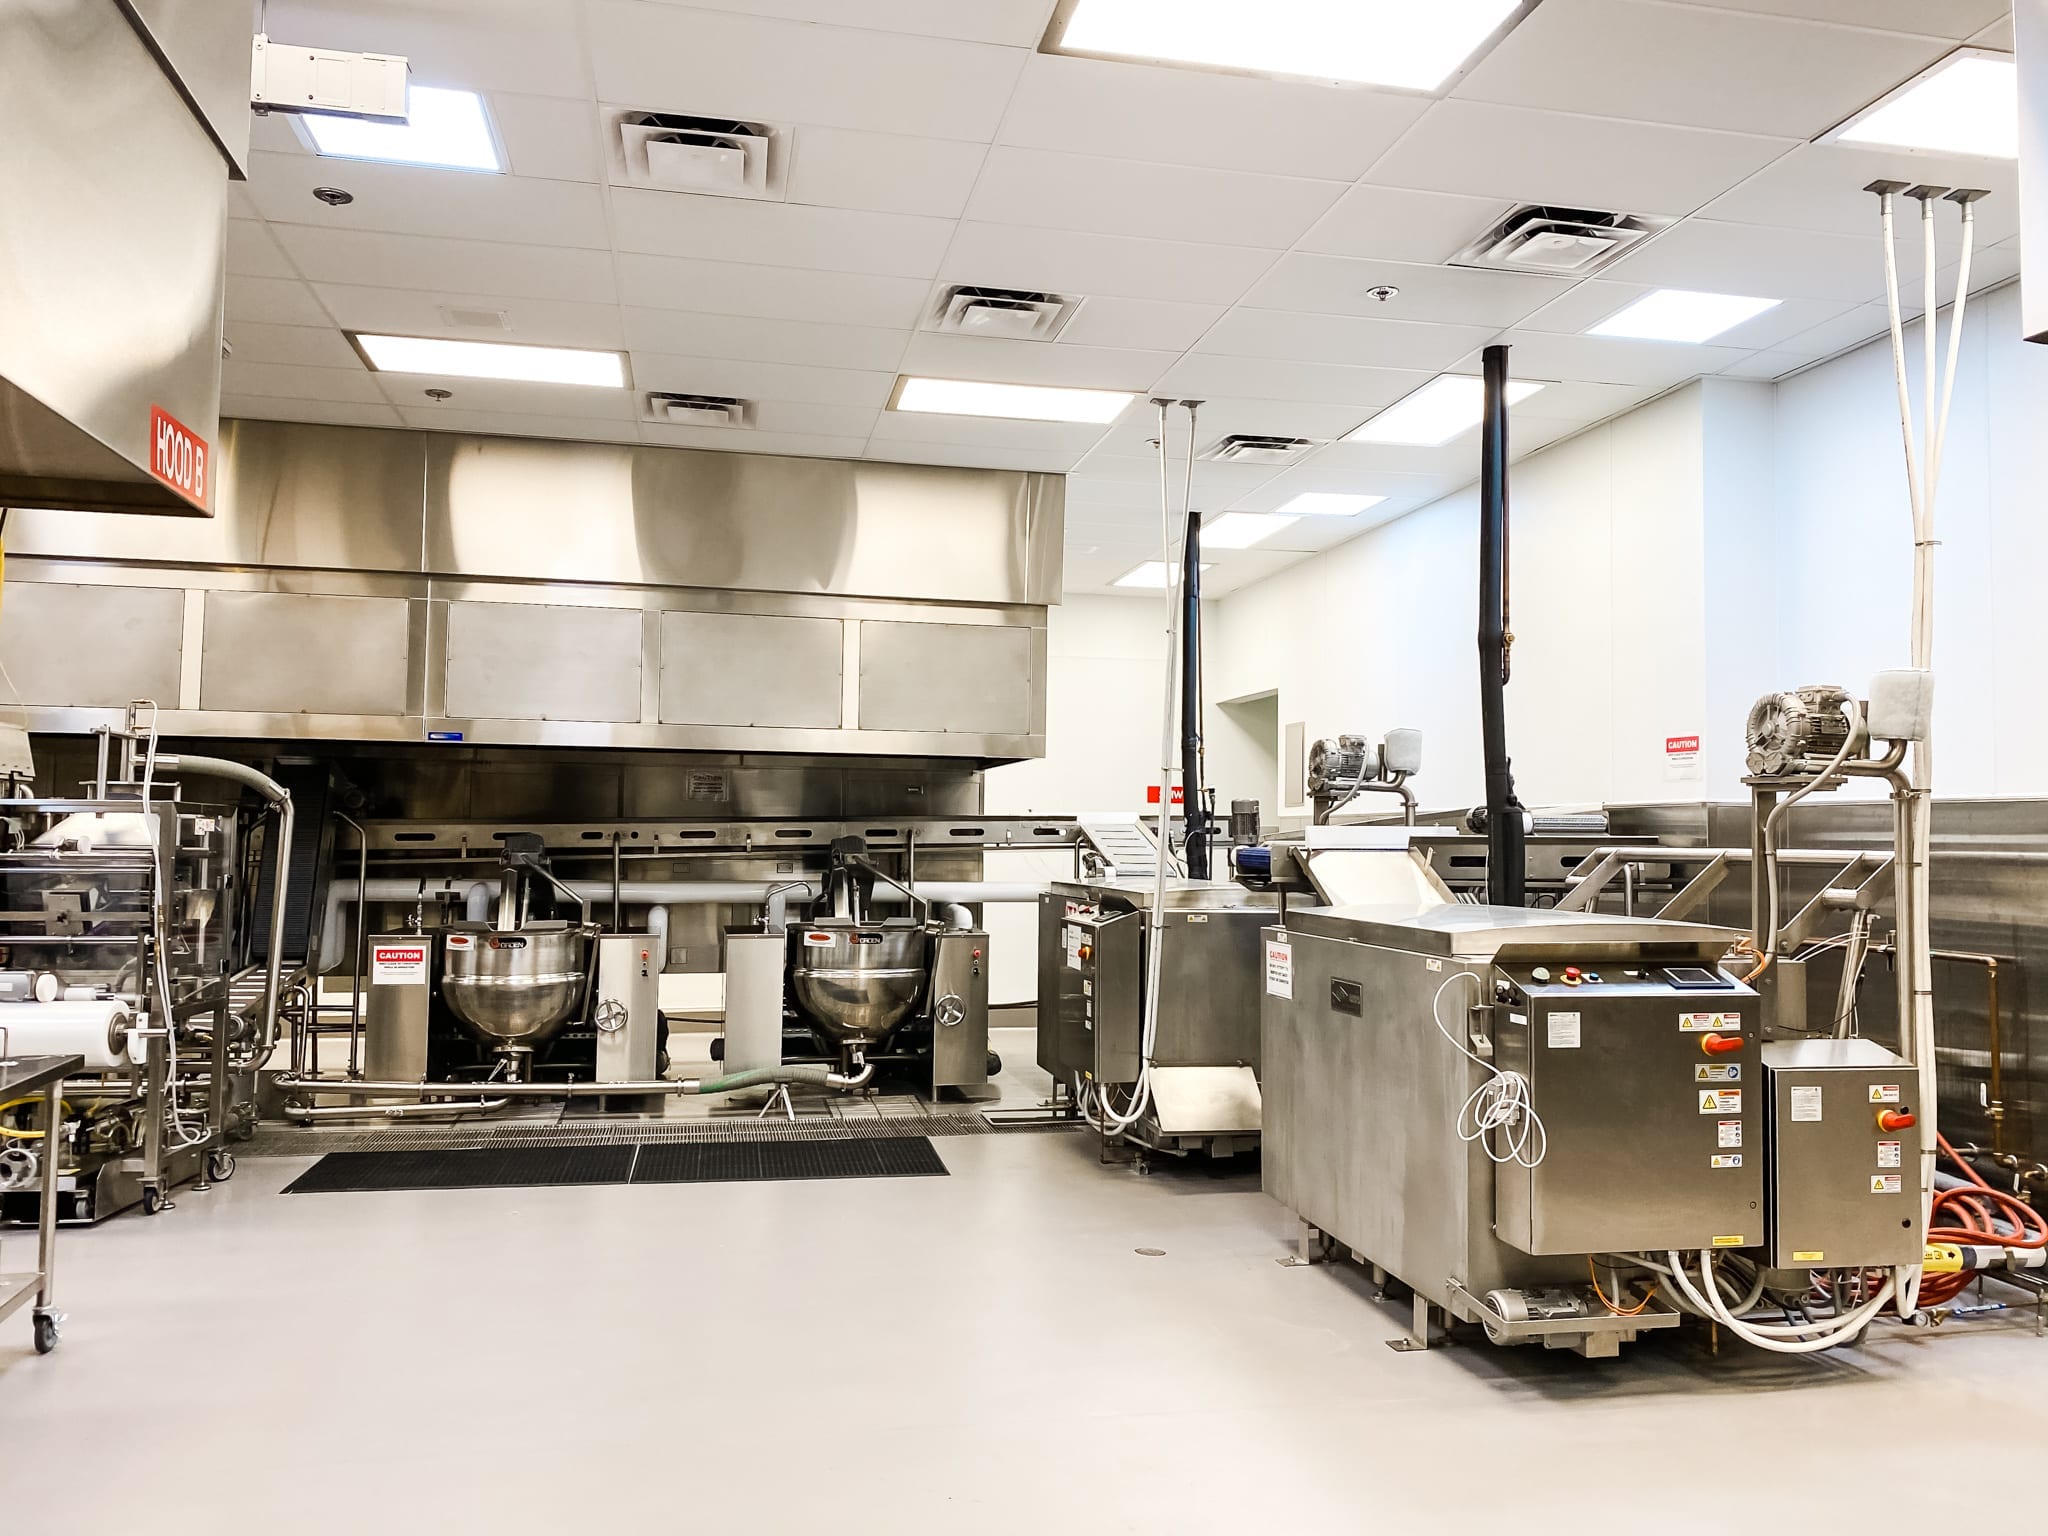 Department Of State Hospitals kitchen machinery.